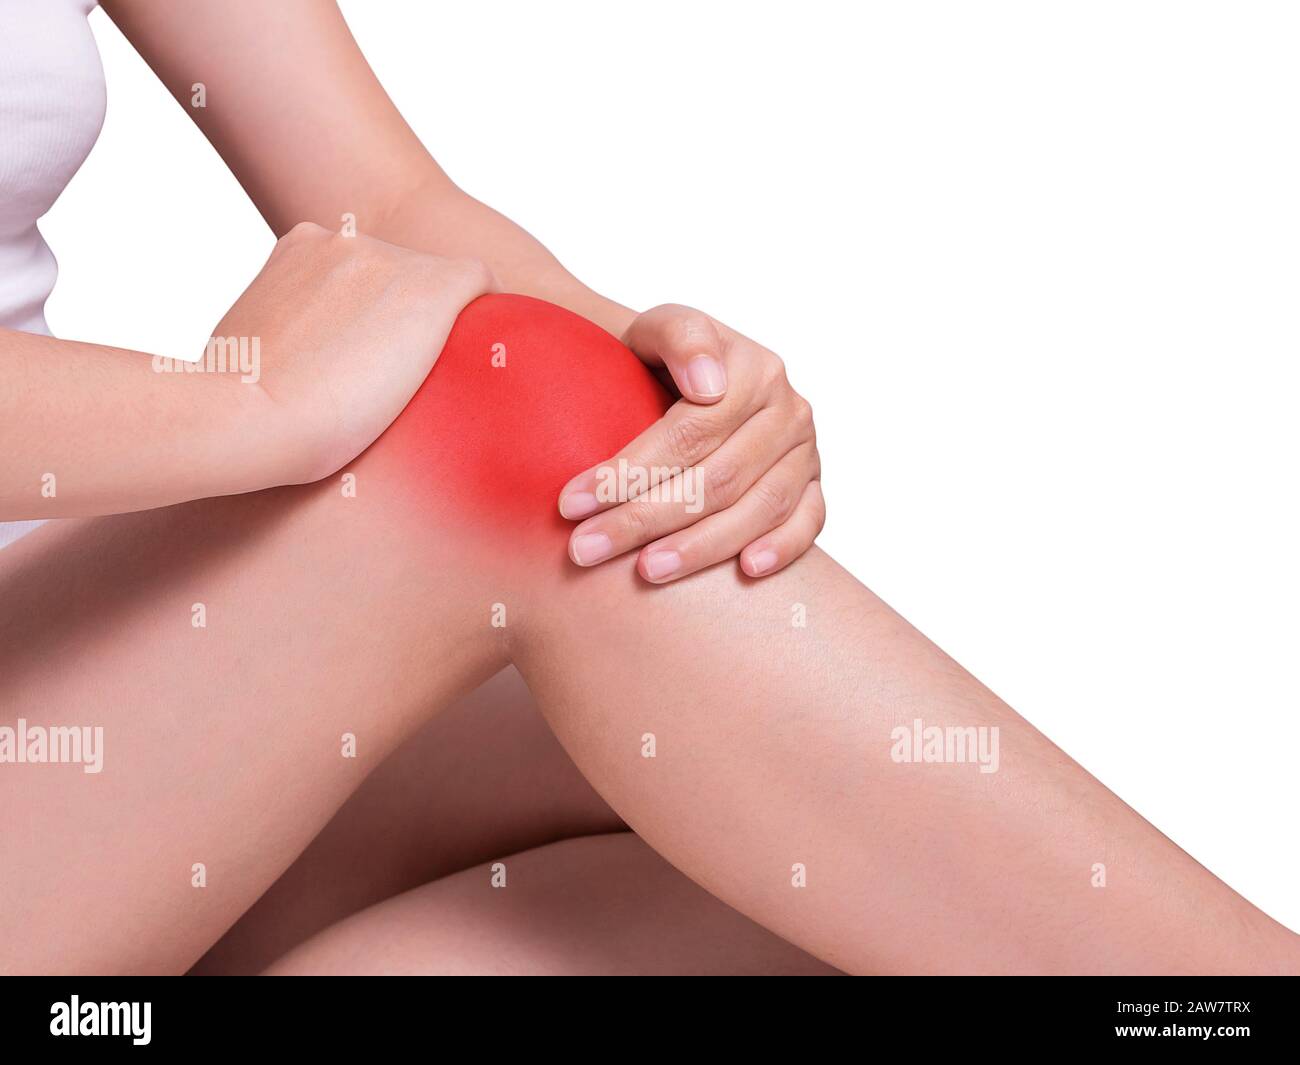 woman's hand holding around knee suffering from knee pain, joint pains. red color highlight at knee isolated on white background. health care and medi Stock Photo